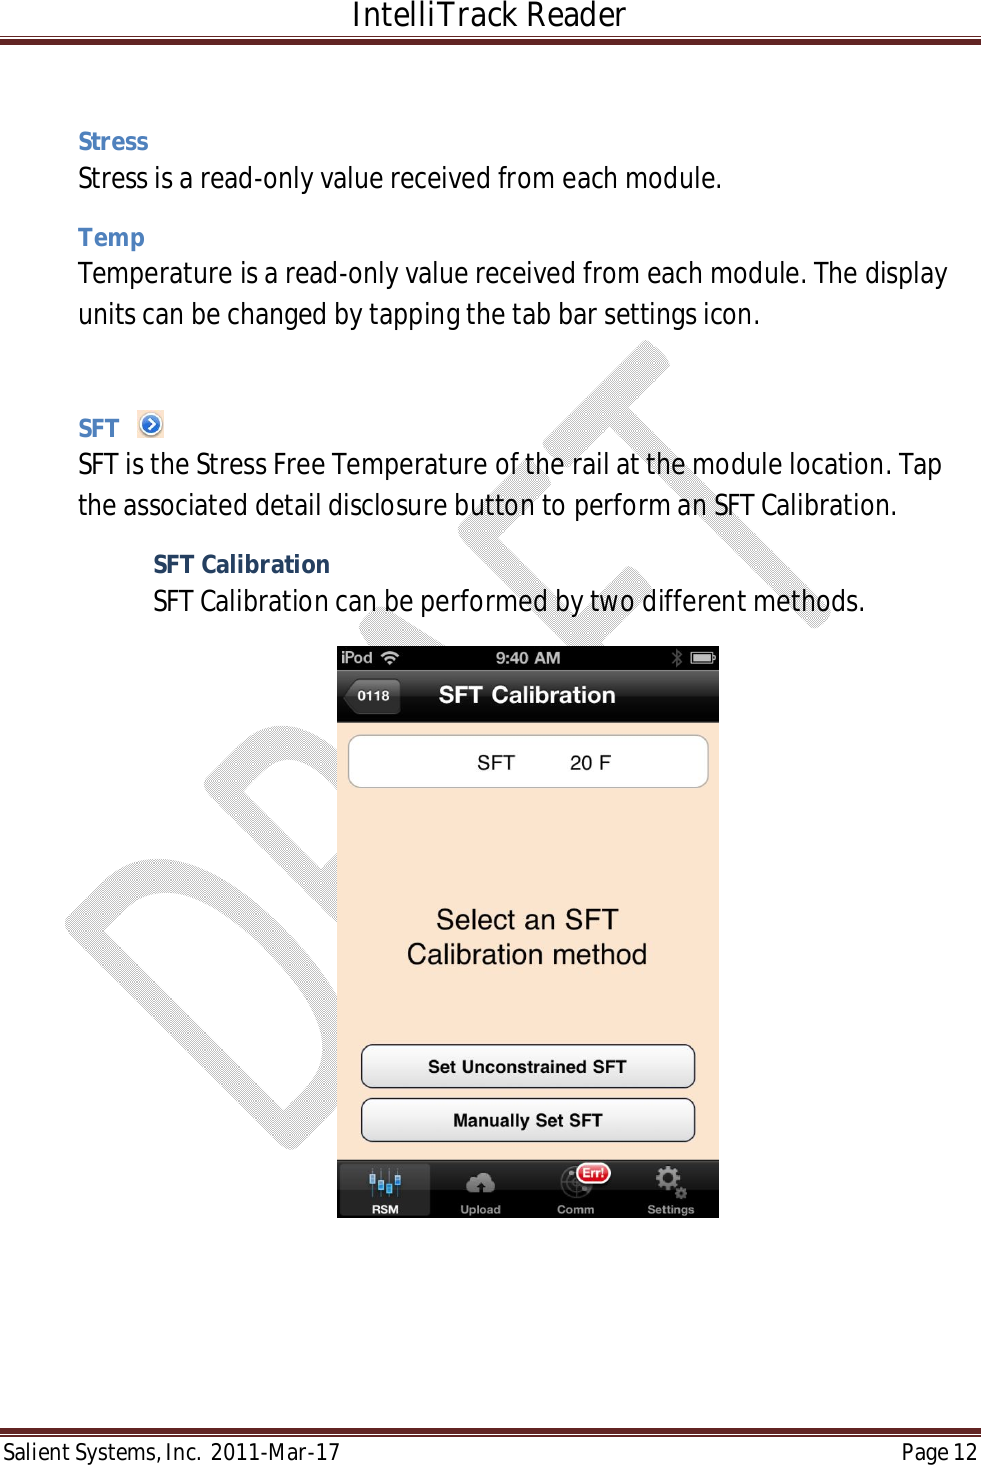 IntelliTrack Reader  Salient Systems, Inc.  2011-Mar-17 Page 12   Stress Stress is a read-only value received from each module.  Temp Temperature is a read-only value received from each module. The display units can be changed by tapping the tab bar settings icon.  SFT     SFT is the Stress Free Temperature of the rail at the module location. Tap the associated detail disclosure button to perform an SFT Calibration. SFT Calibration SFT Calibration can be performed by two different methods.   